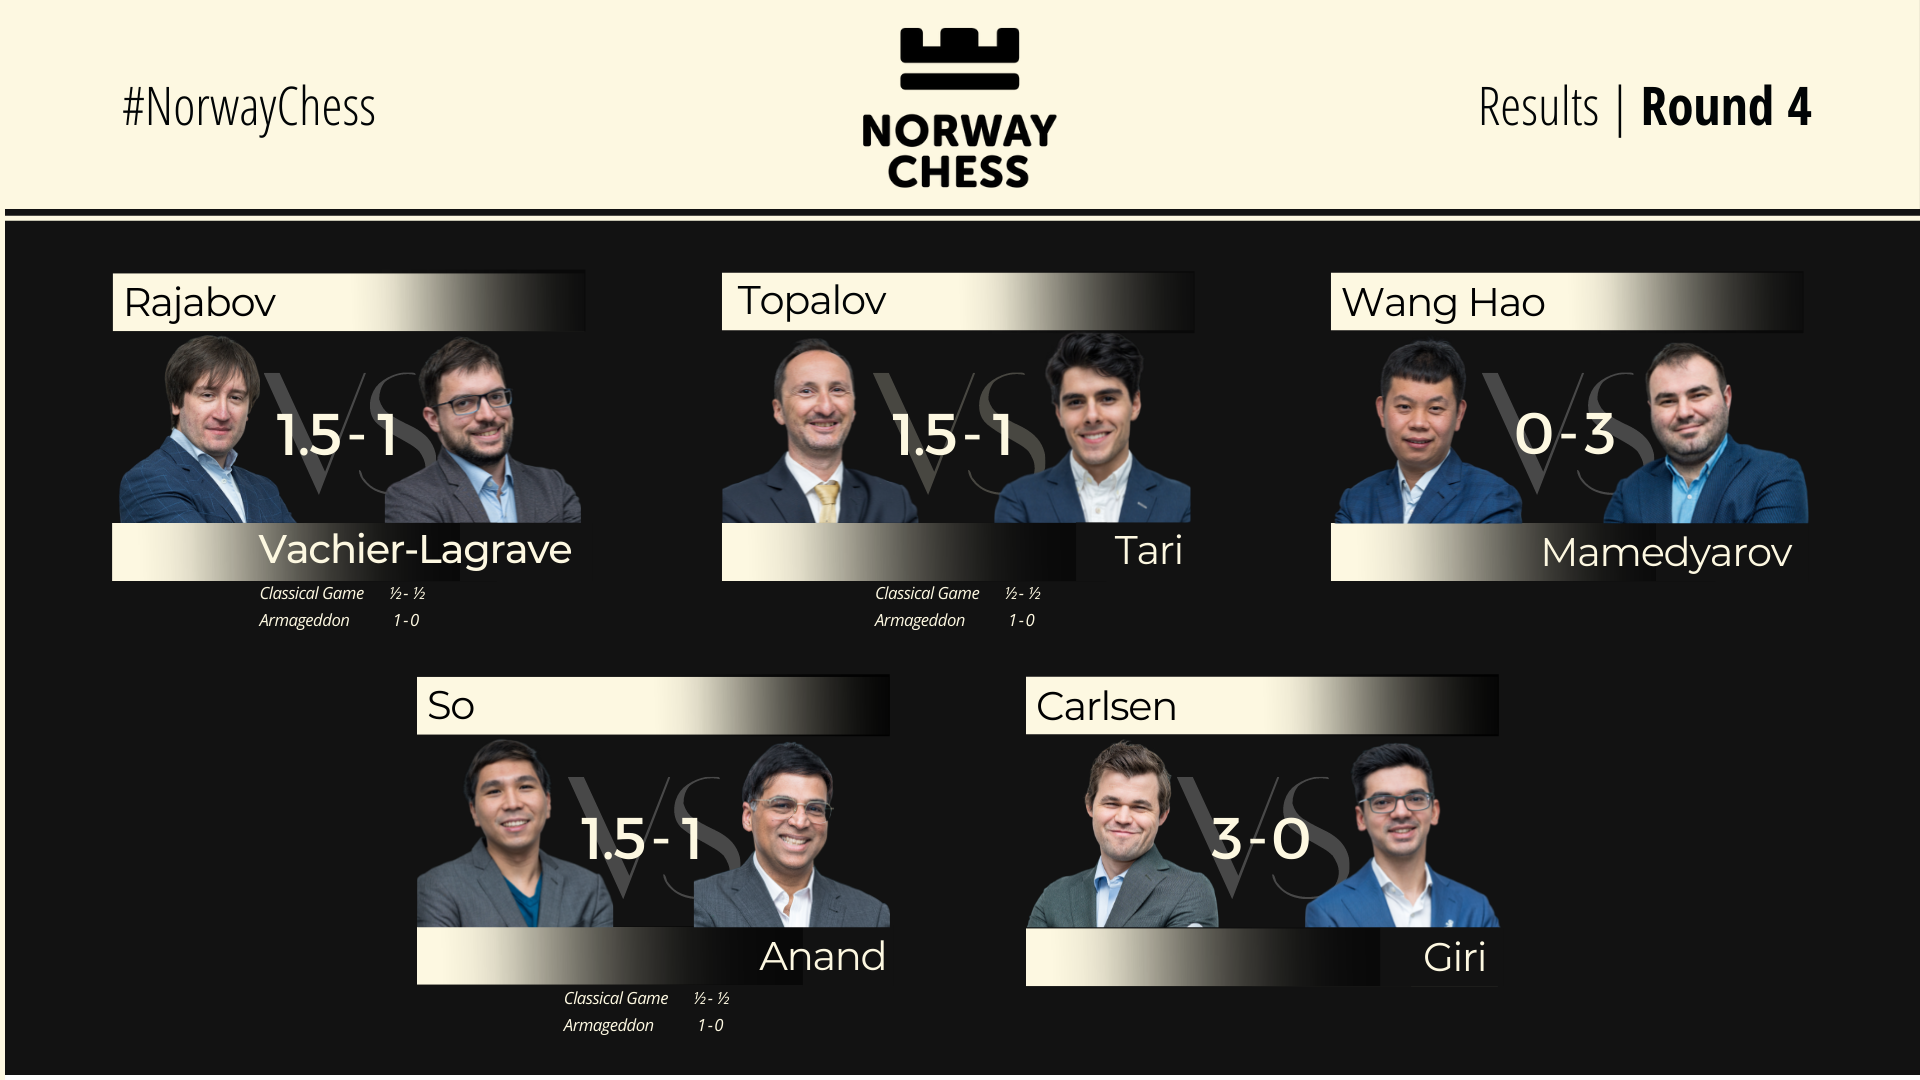 Norway Chess Results Round 4